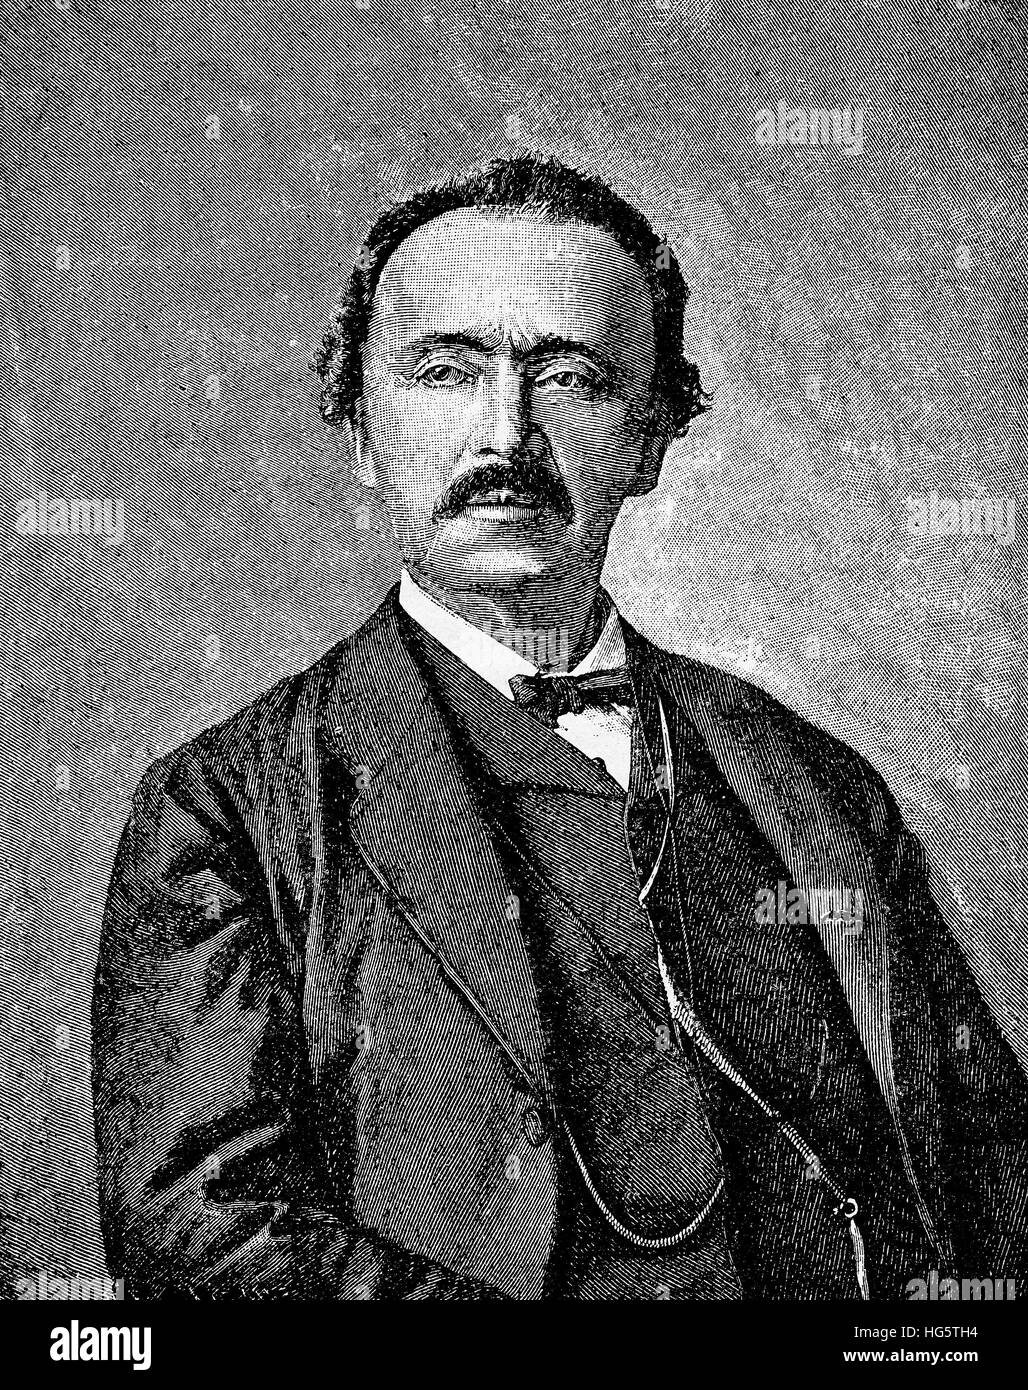 Heinrich Schliemann was a German businessman and archaeologist pioneer of excavation related to the site of ancient Troy and other historical places described by Homer. Stock Photo